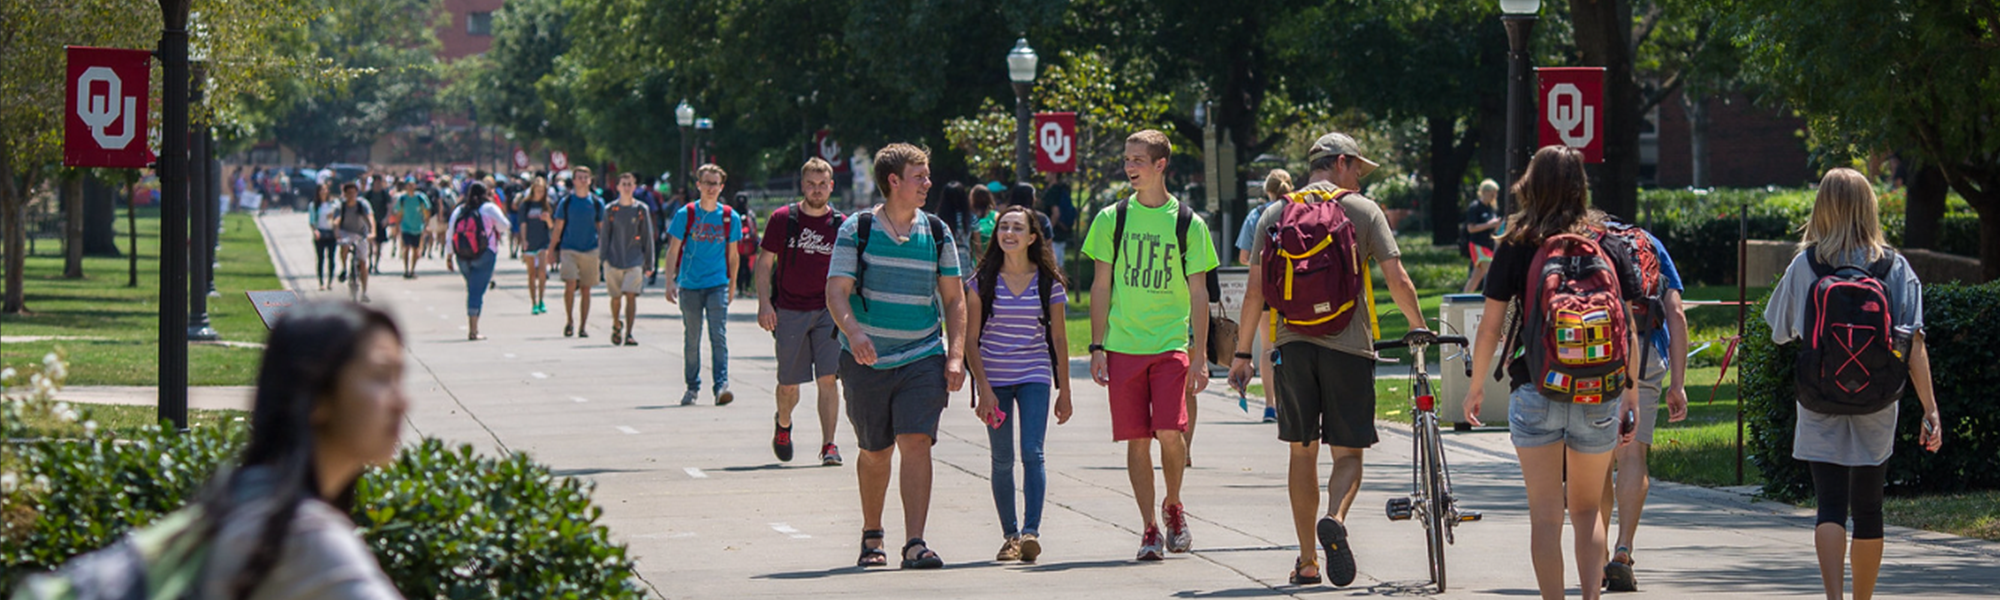 Students at the South Oval 